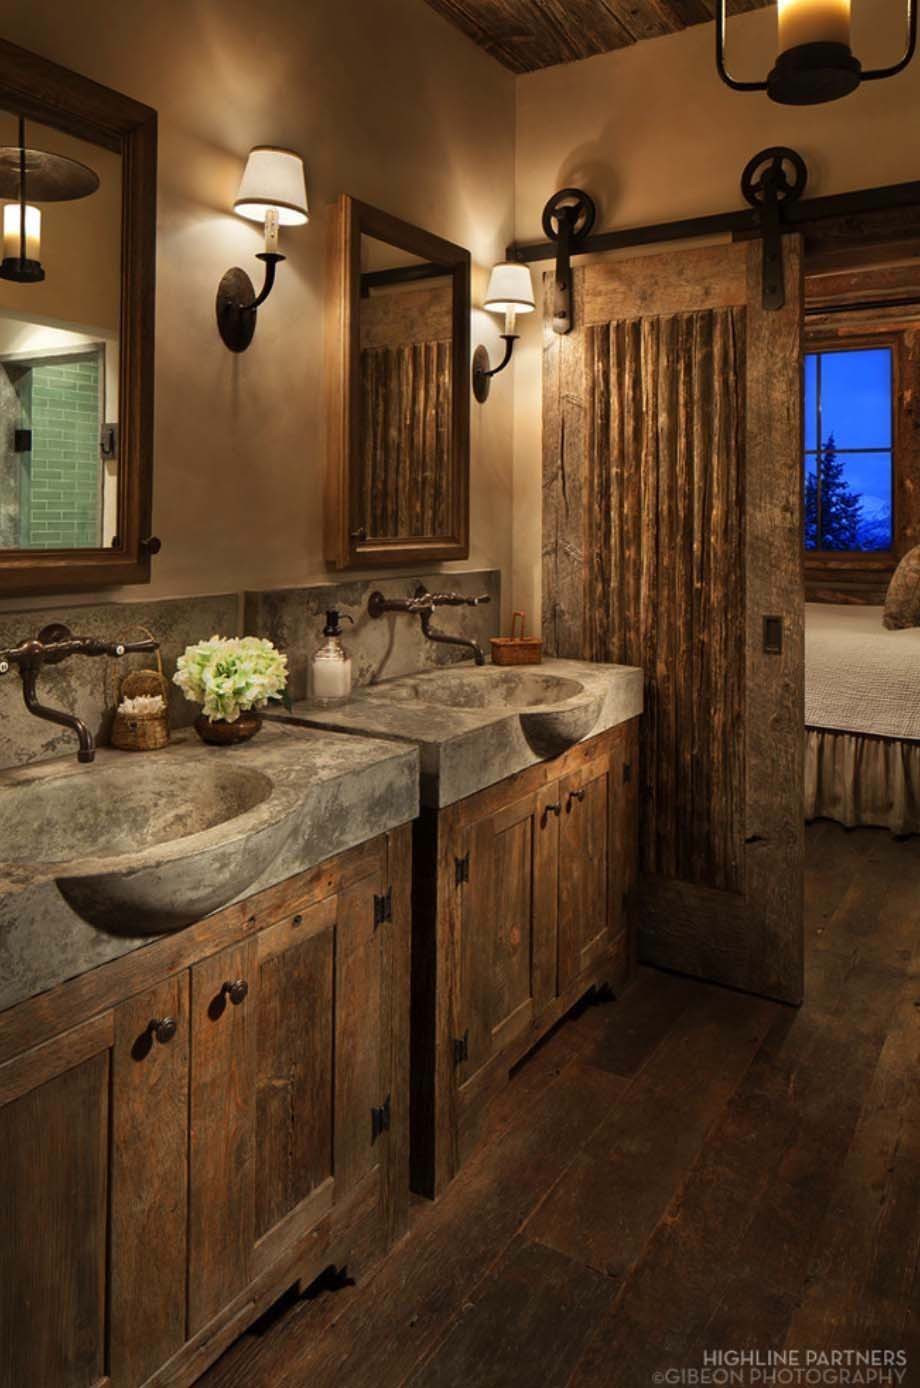 Small Rustic Bathroom
 Best Small Space Organization Hacks 31 Gorgeous Rustic